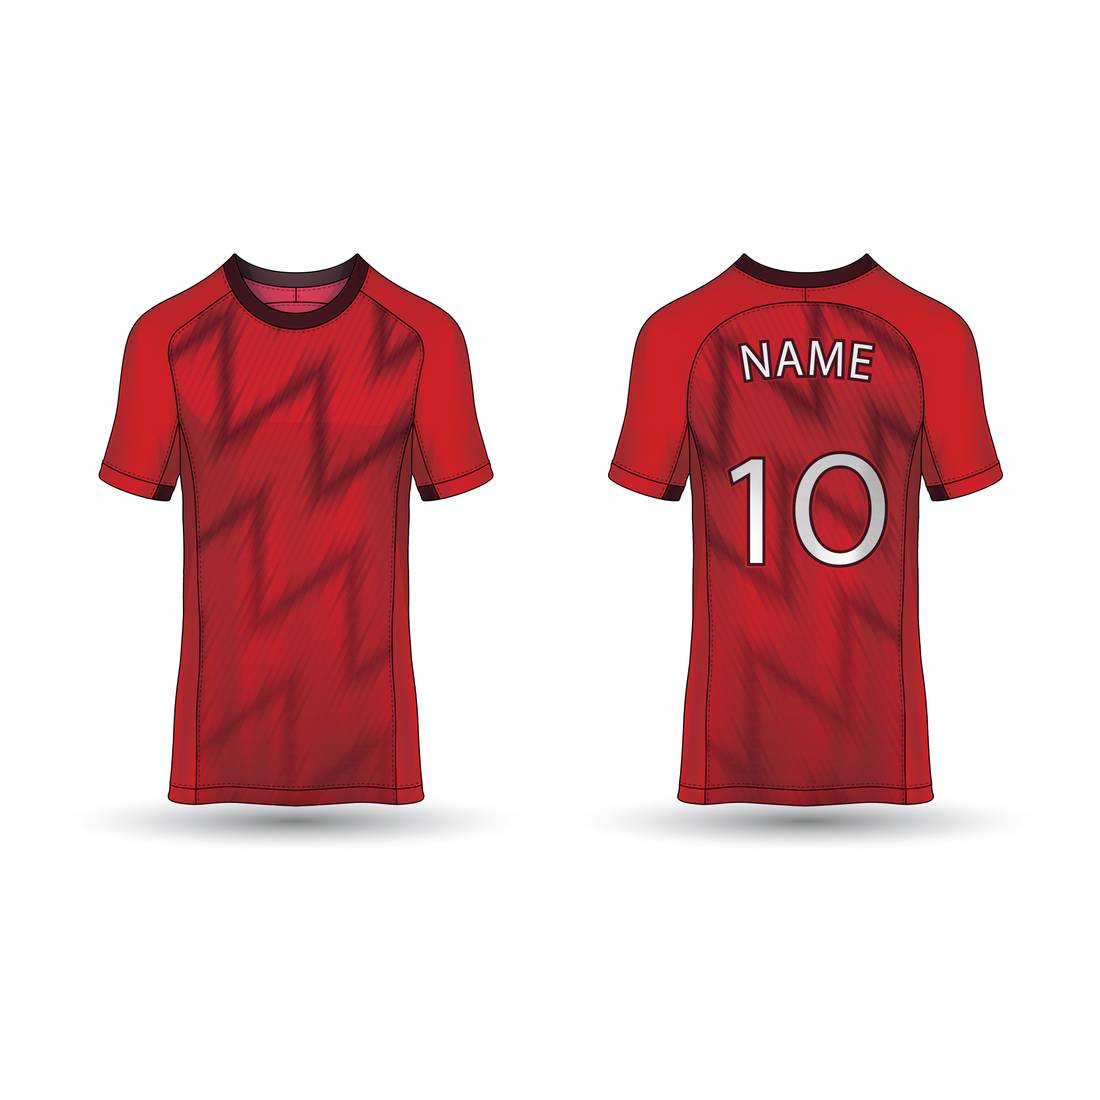 NEXT PRINT All Over Printed Customized Sublimation T-Shirt Unisex Sports Jersey Player Name & Number, Team Name NP50000211